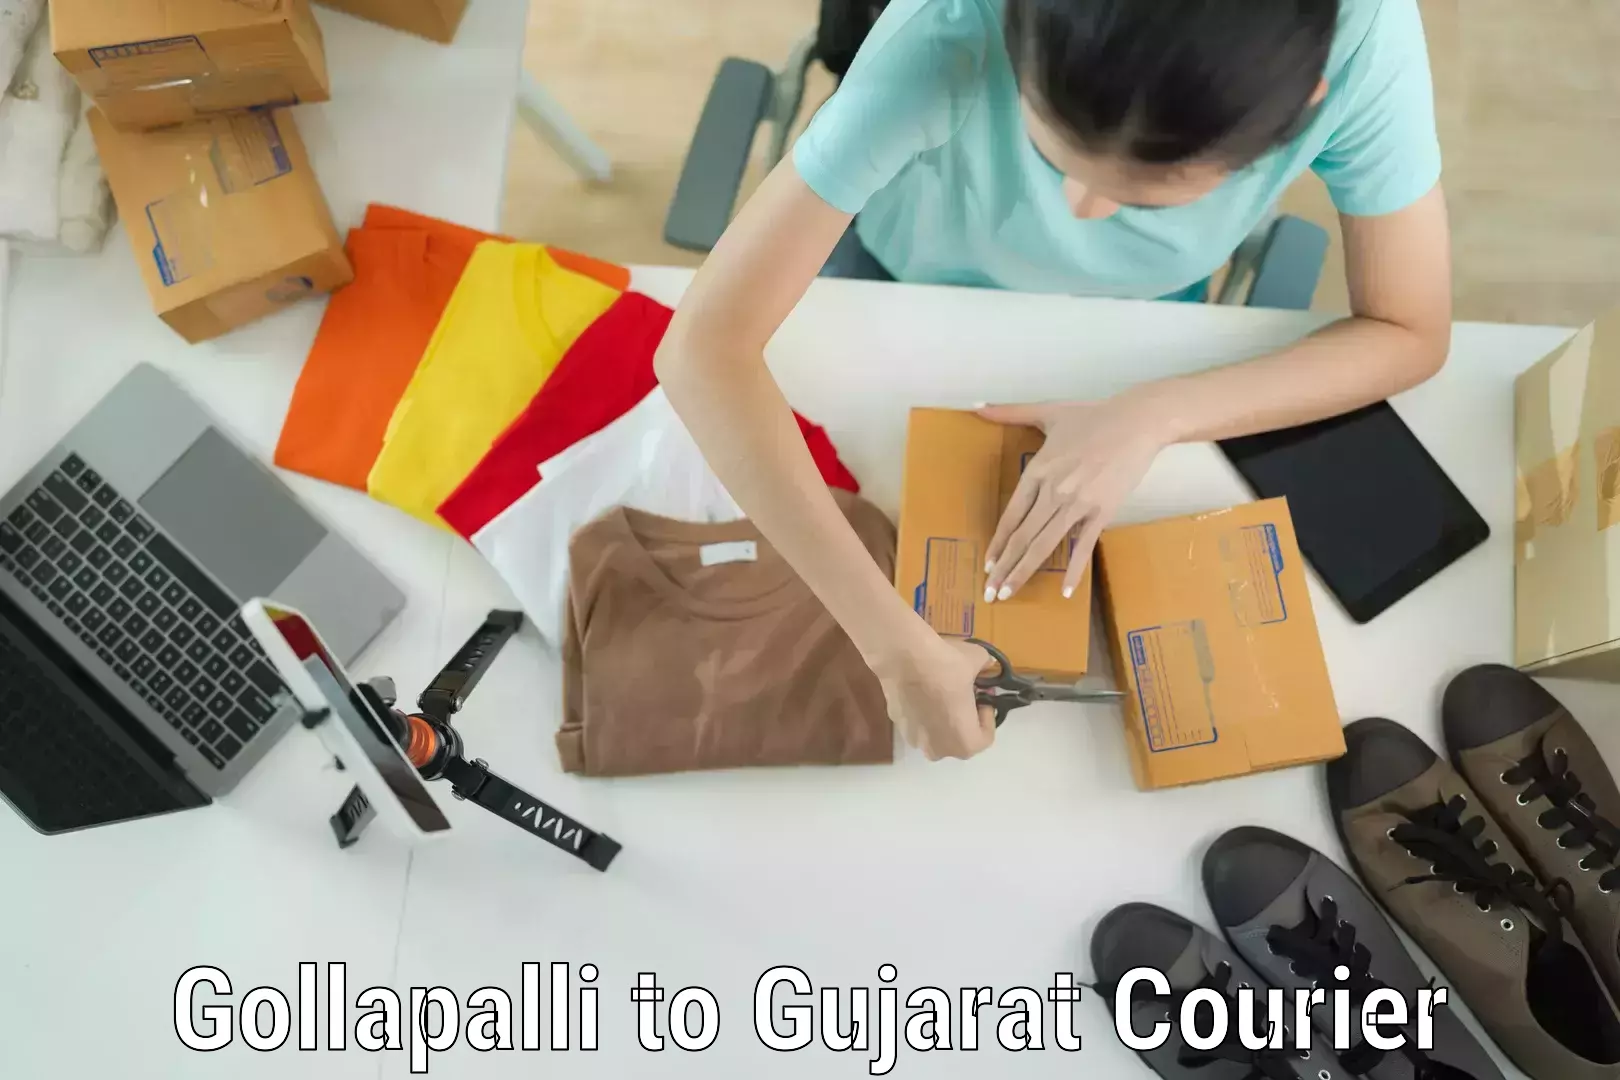 Luggage delivery providers Gollapalli to Gujarat